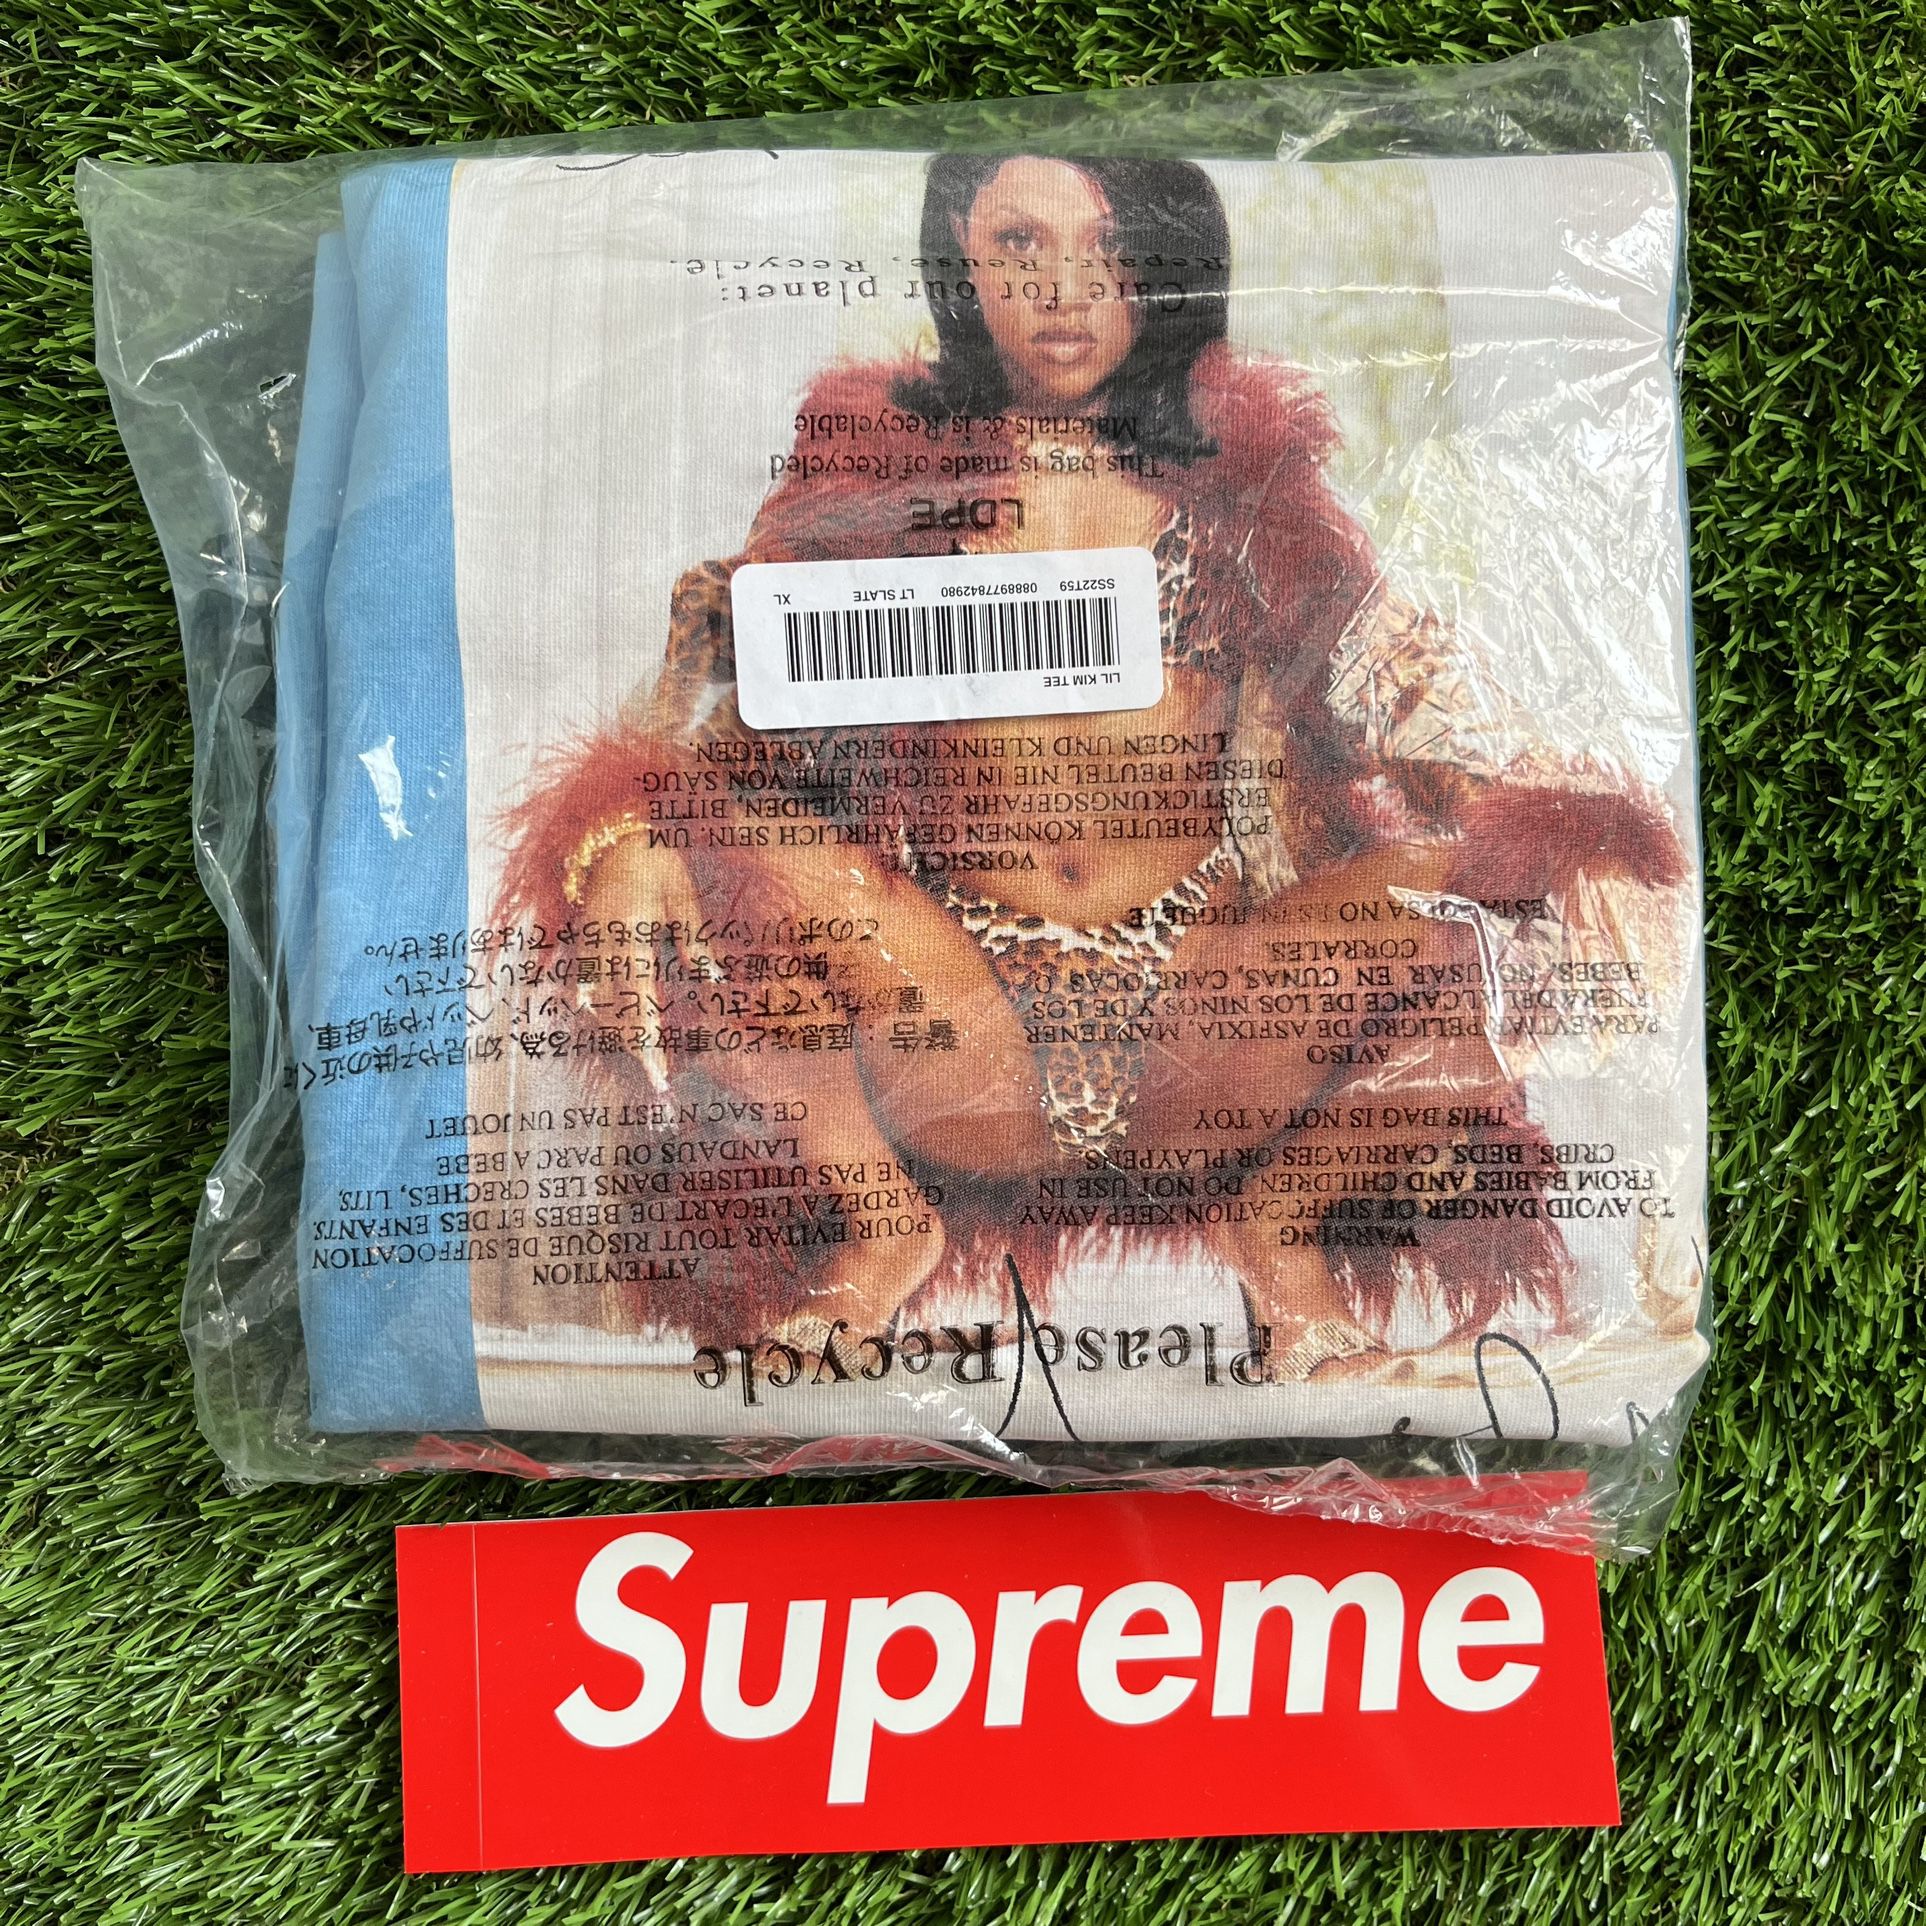 Supreme Lil Kim Tee size XL Adult Mens Short Sleeve Extra Large Pale Teal Blue Light Shirt All Over Print